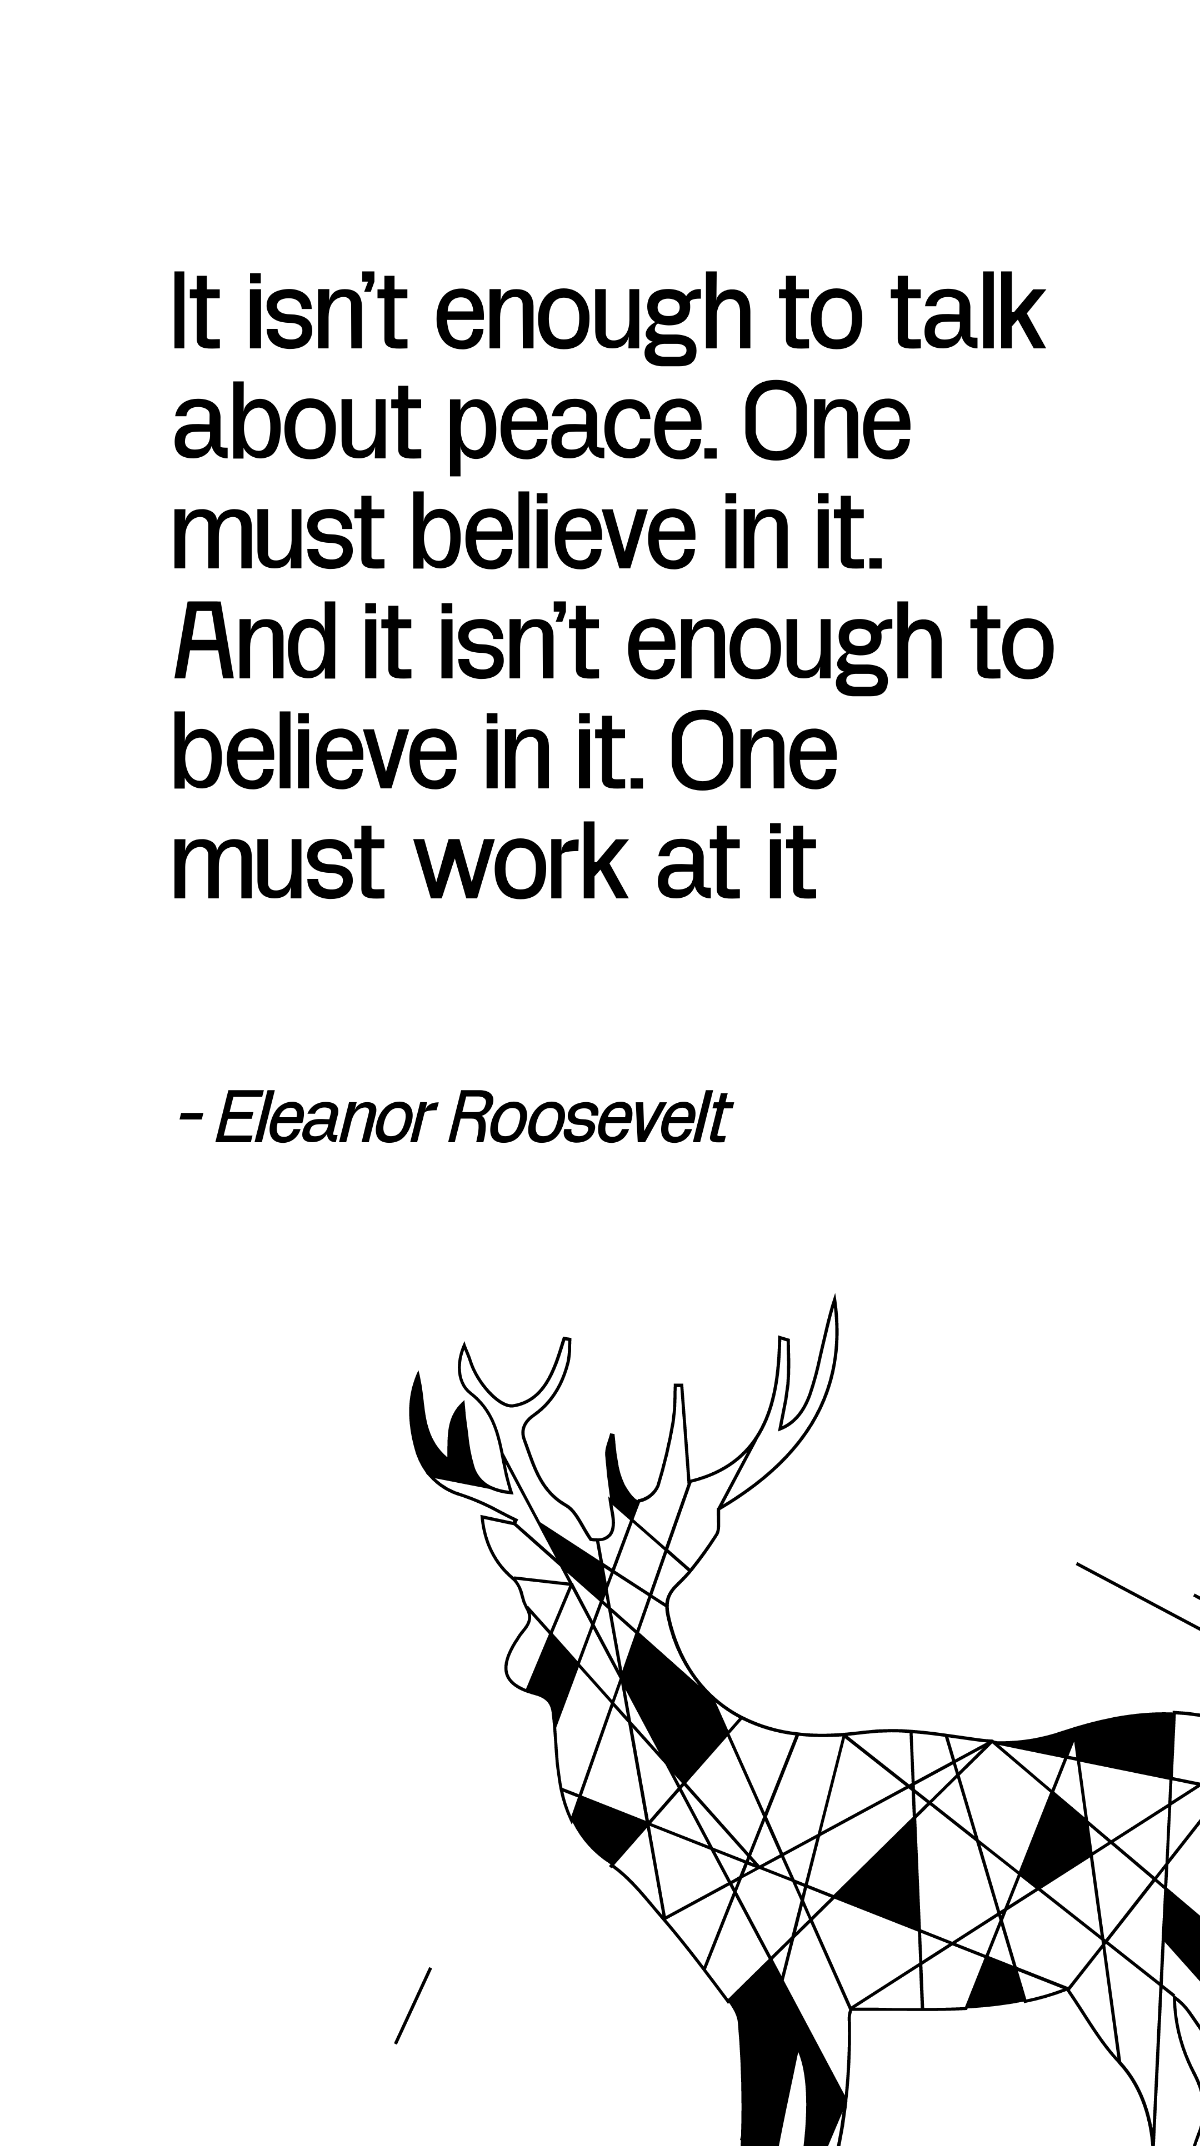 Eleanor Roosevelt - It isn't enough to talk about peace. One must believe in it. And it isn't enough to believe in it. One must work at it